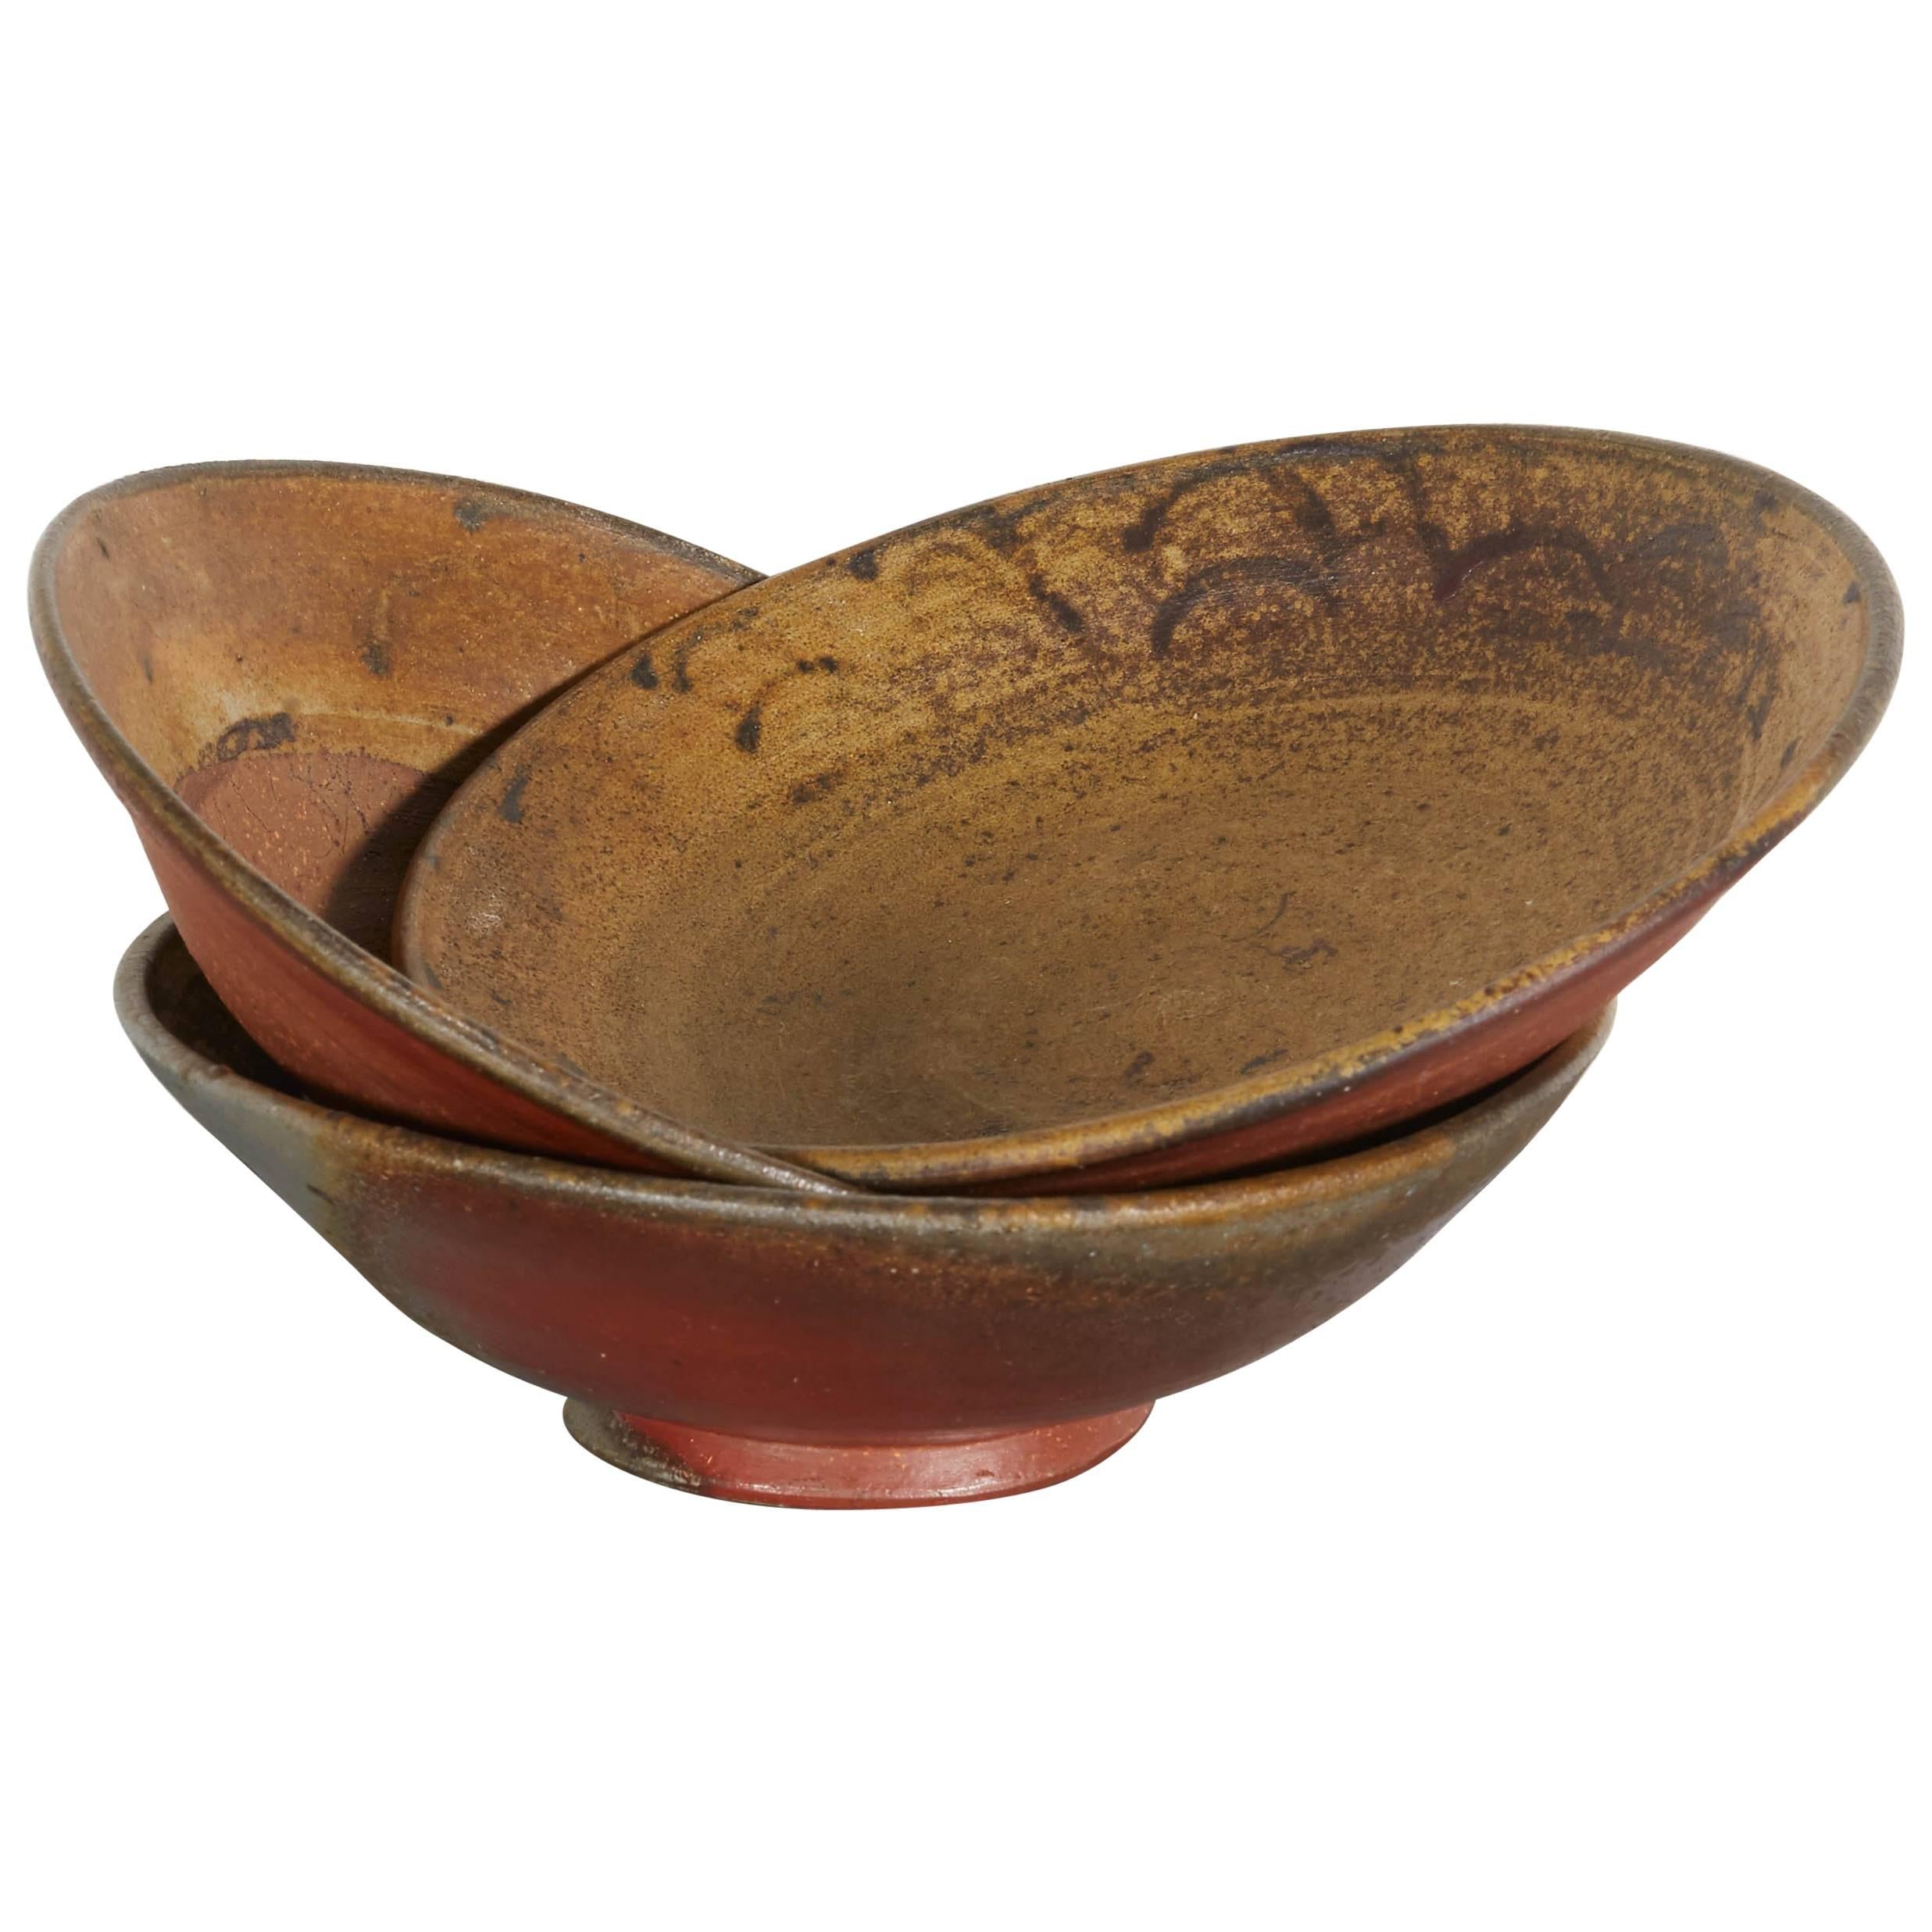 Slow Fired Japanese Bizen Ware Bowls For Sale